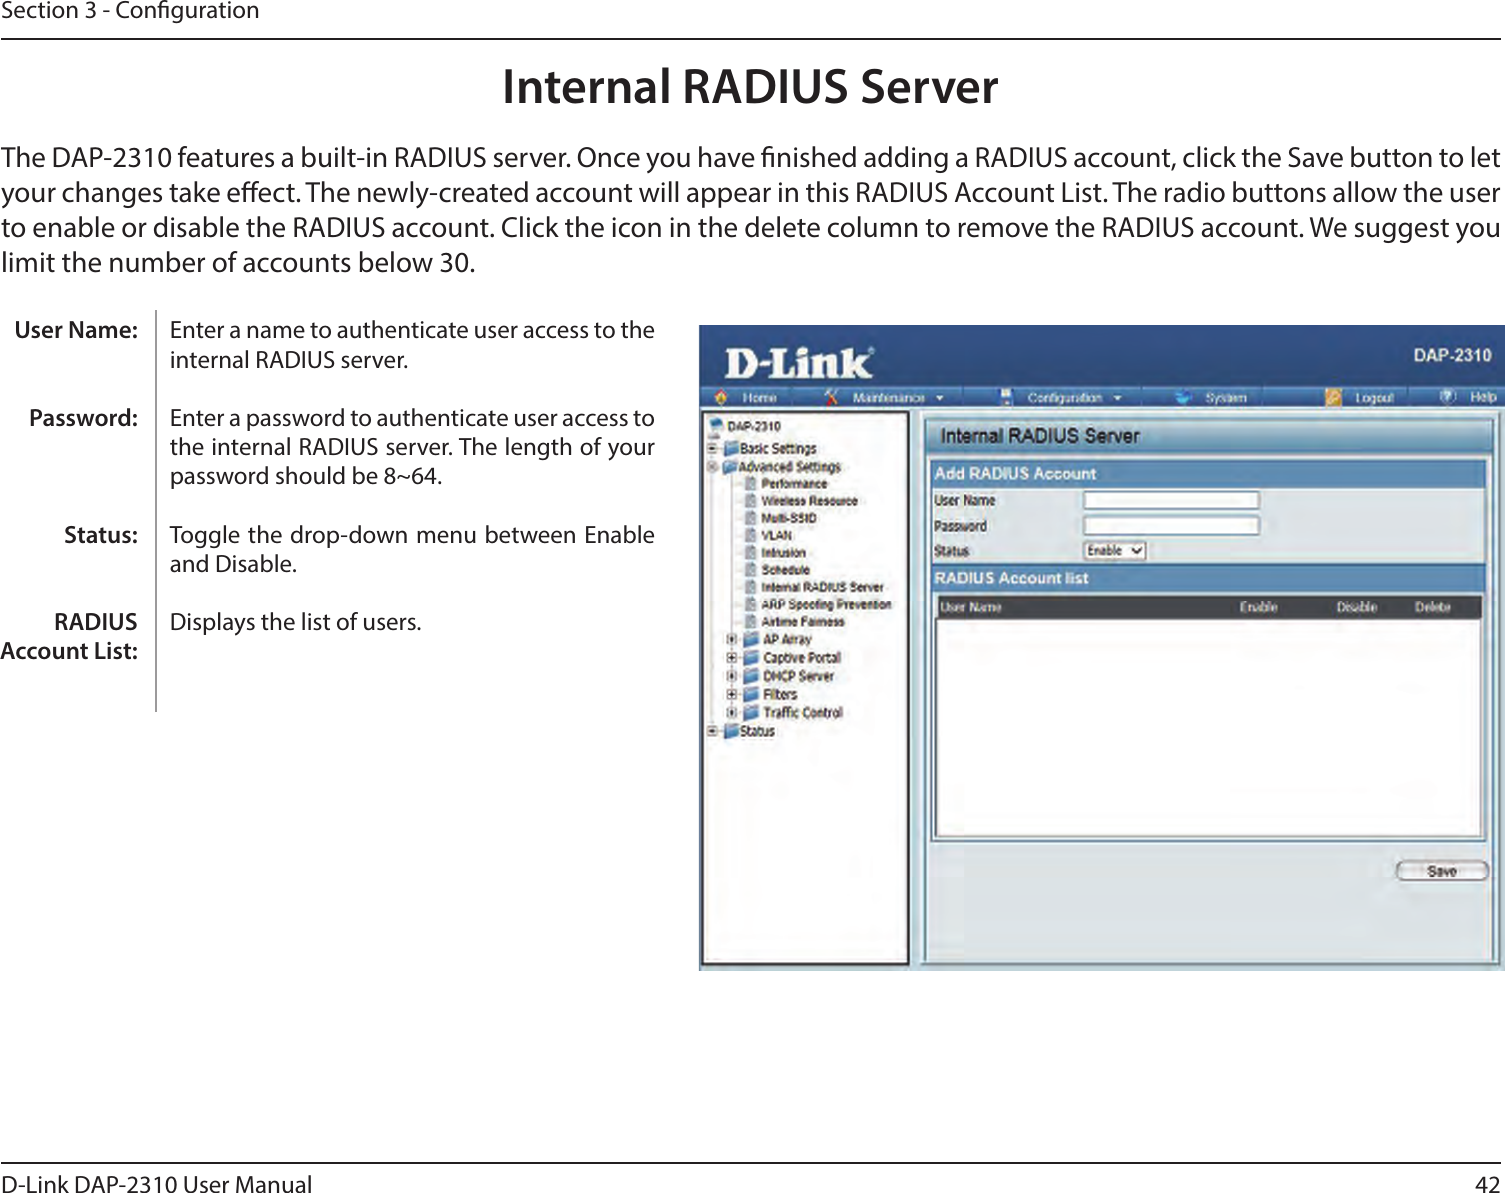 42D-Link DAP-2310 User ManualSection 3 - CongurationInternal RADIUS ServerThe DAP-2310 features a built-in RADIUS server. Once you have nished adding a RADIUS account, click the Save button to let your changes take eect. The newly-created account will appear in this RADIUS Account List. The radio buttons allow the user to enable or disable the RADIUS account. Click the icon in the delete column to remove the RADIUS account. We suggest you limit the number of accounts below 30.Enter a name to authenticate user access to the internal RADIUS server.Enter a password to authenticate user access to the internal RADIUS server. The length of your password should be 8~64.Toggle the drop-down menu between Enable and Disable.Displays the list of users. User Name:Password:Status:RADIUS Account List: